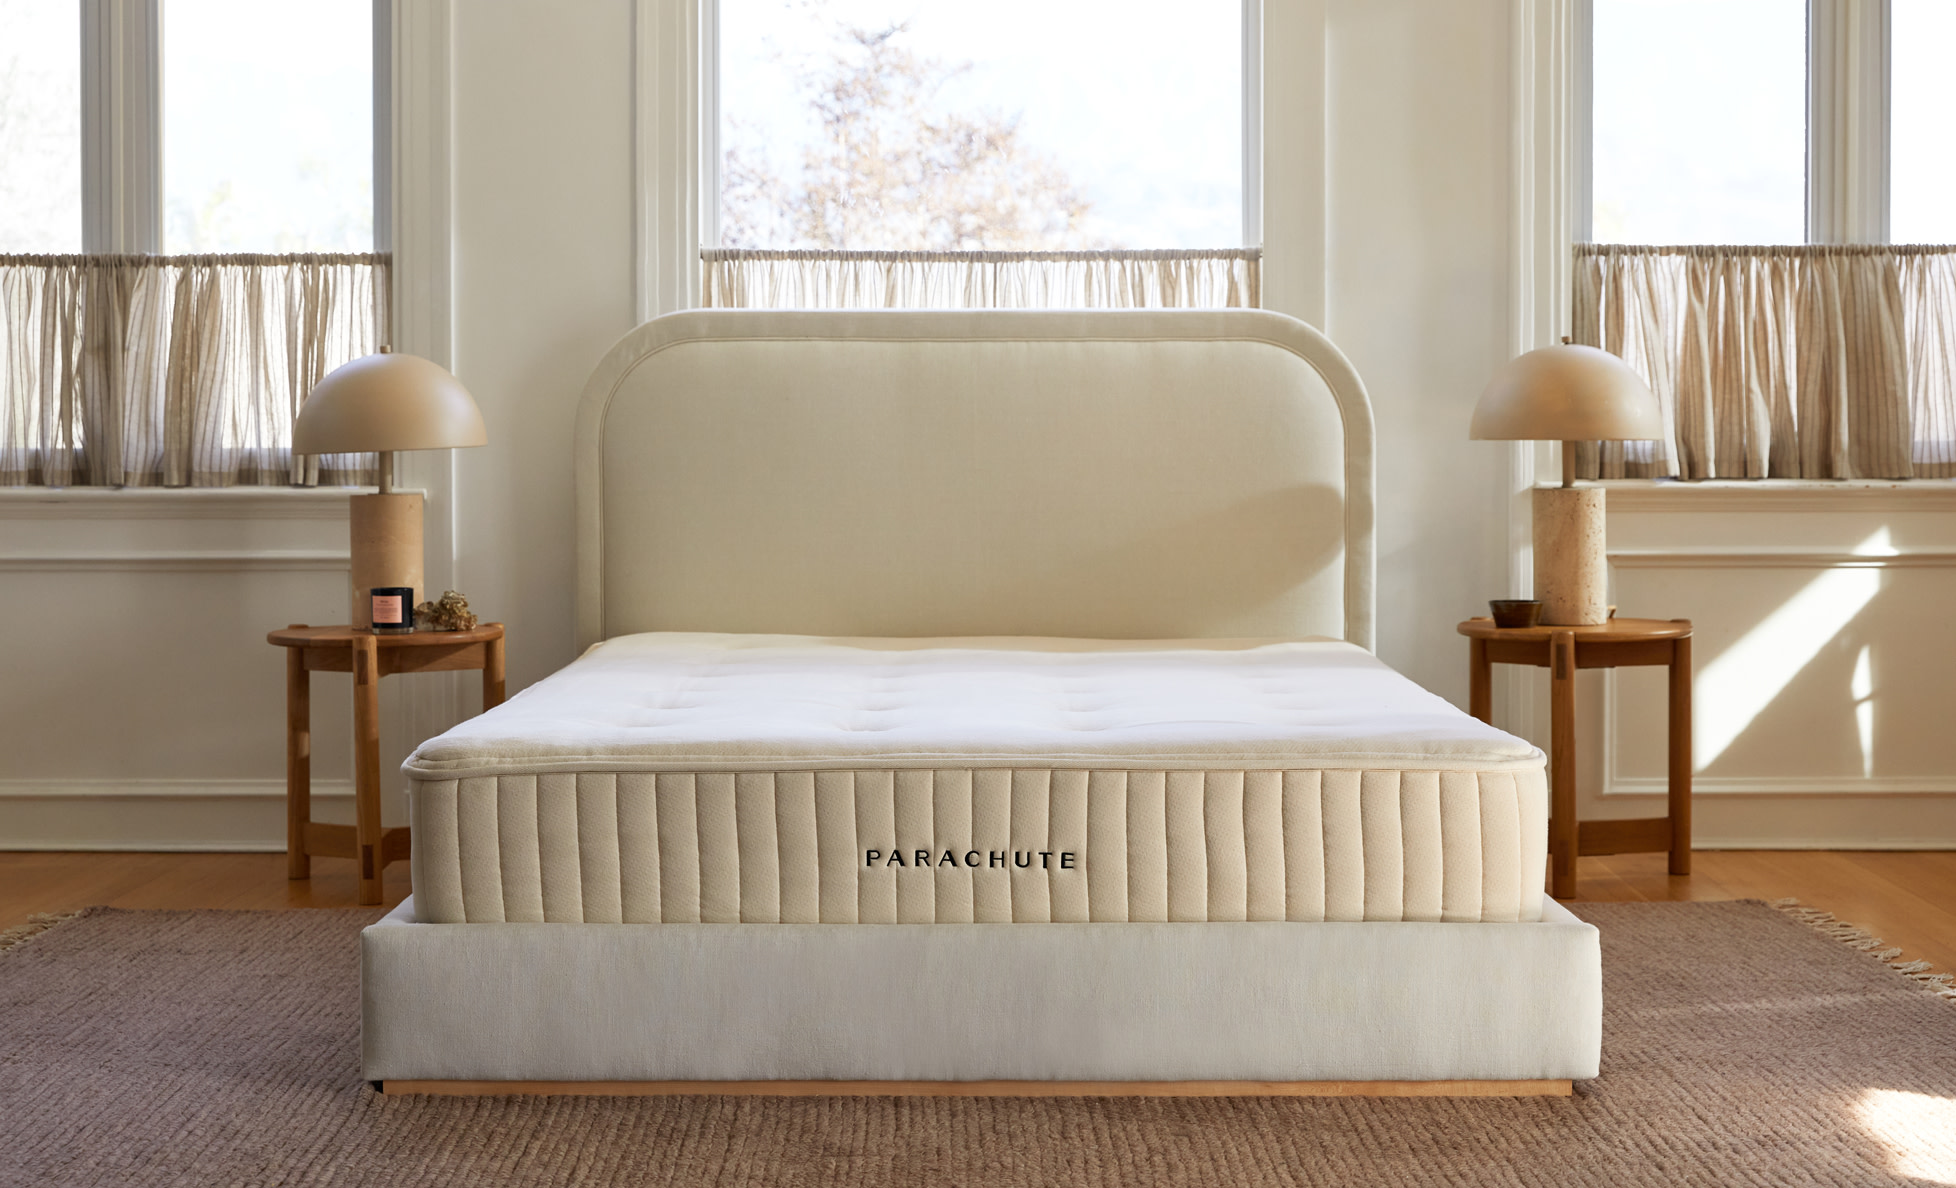 Mattress resting on a bed frame in a bright bedroom